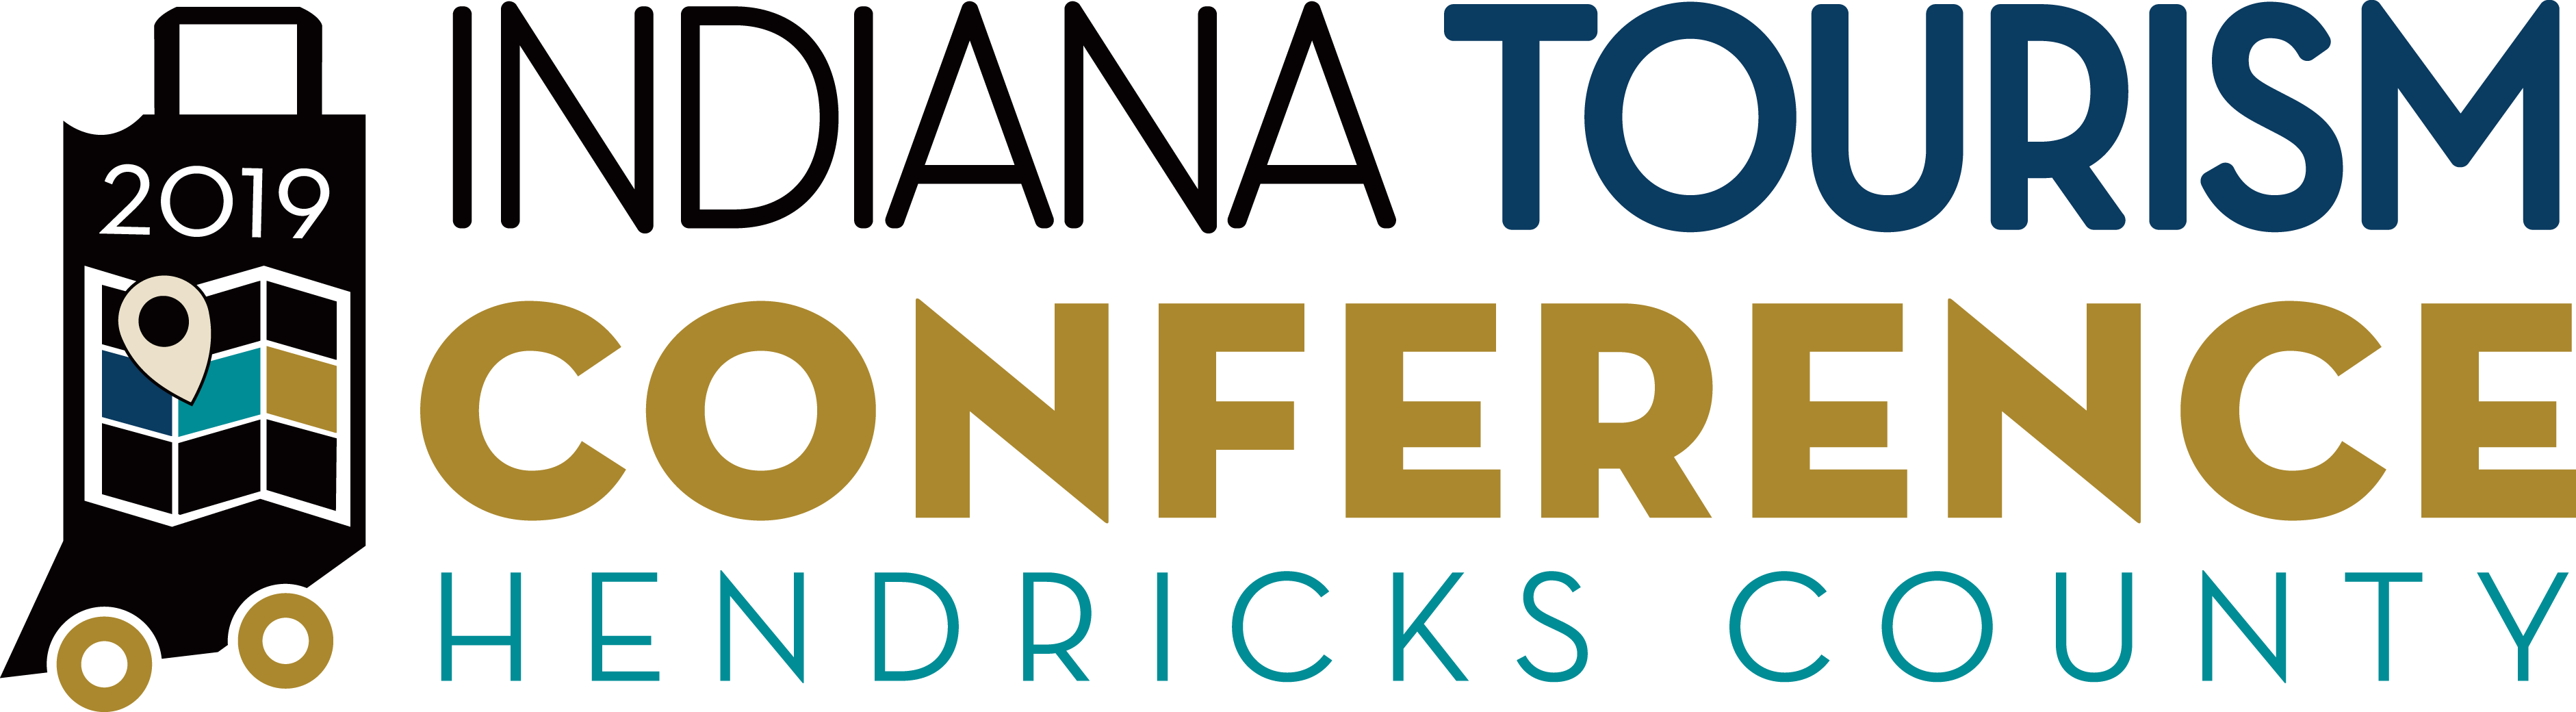 indiana tourism conference